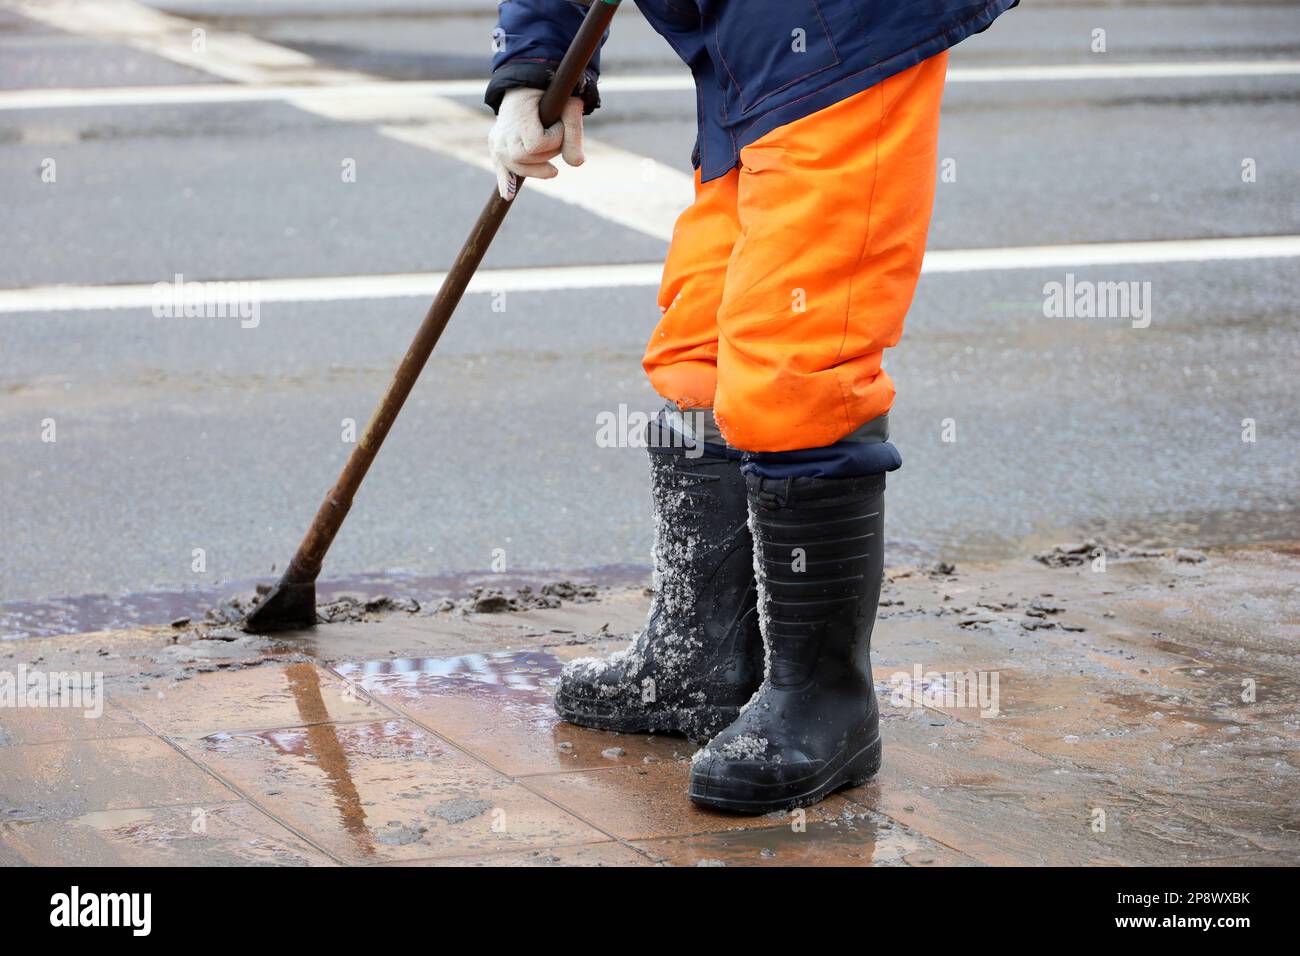 Worker breaks ice and melting snow on the road with a crowbar. Snow removal in city, street cleaning in early spring Stock Photo